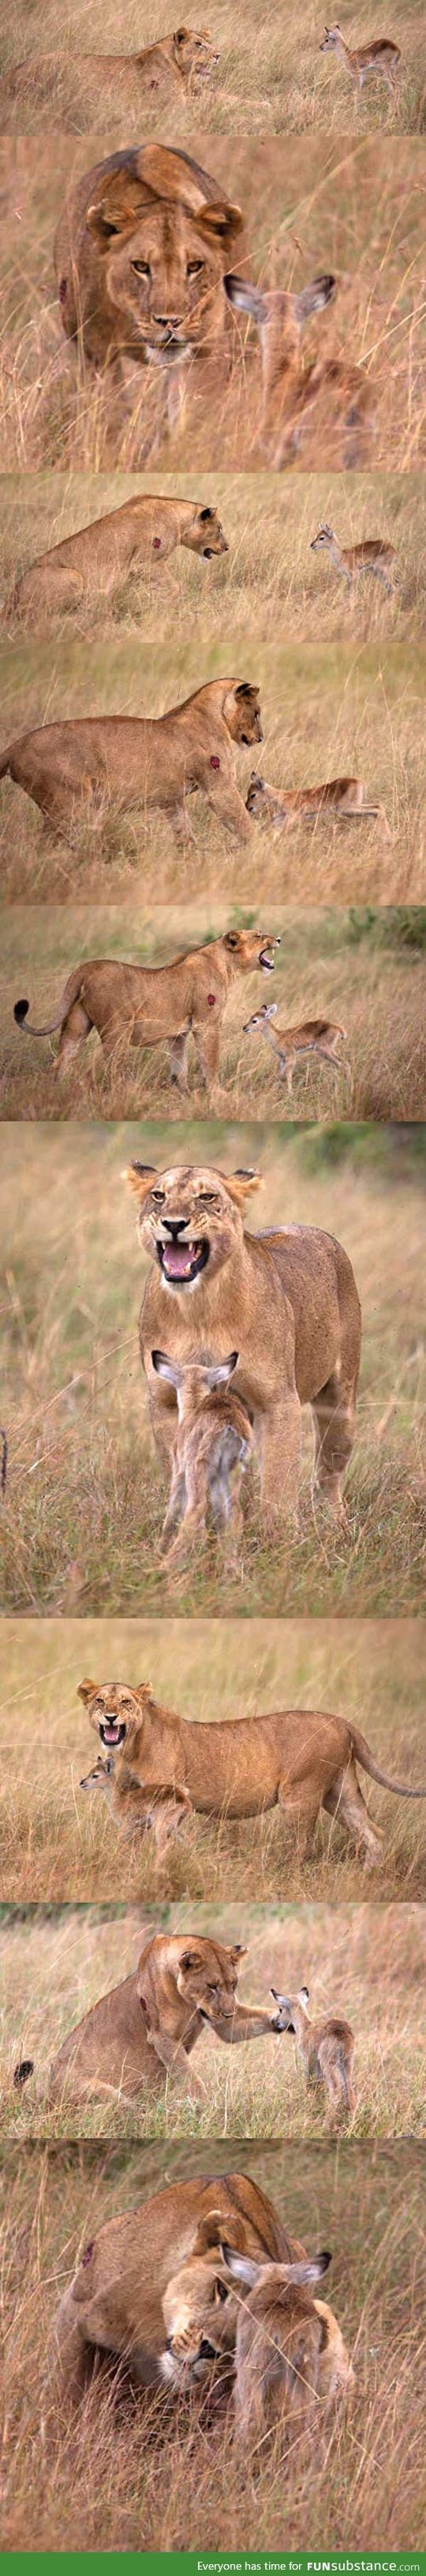 A lioness decides to adopt a baby gazelle?